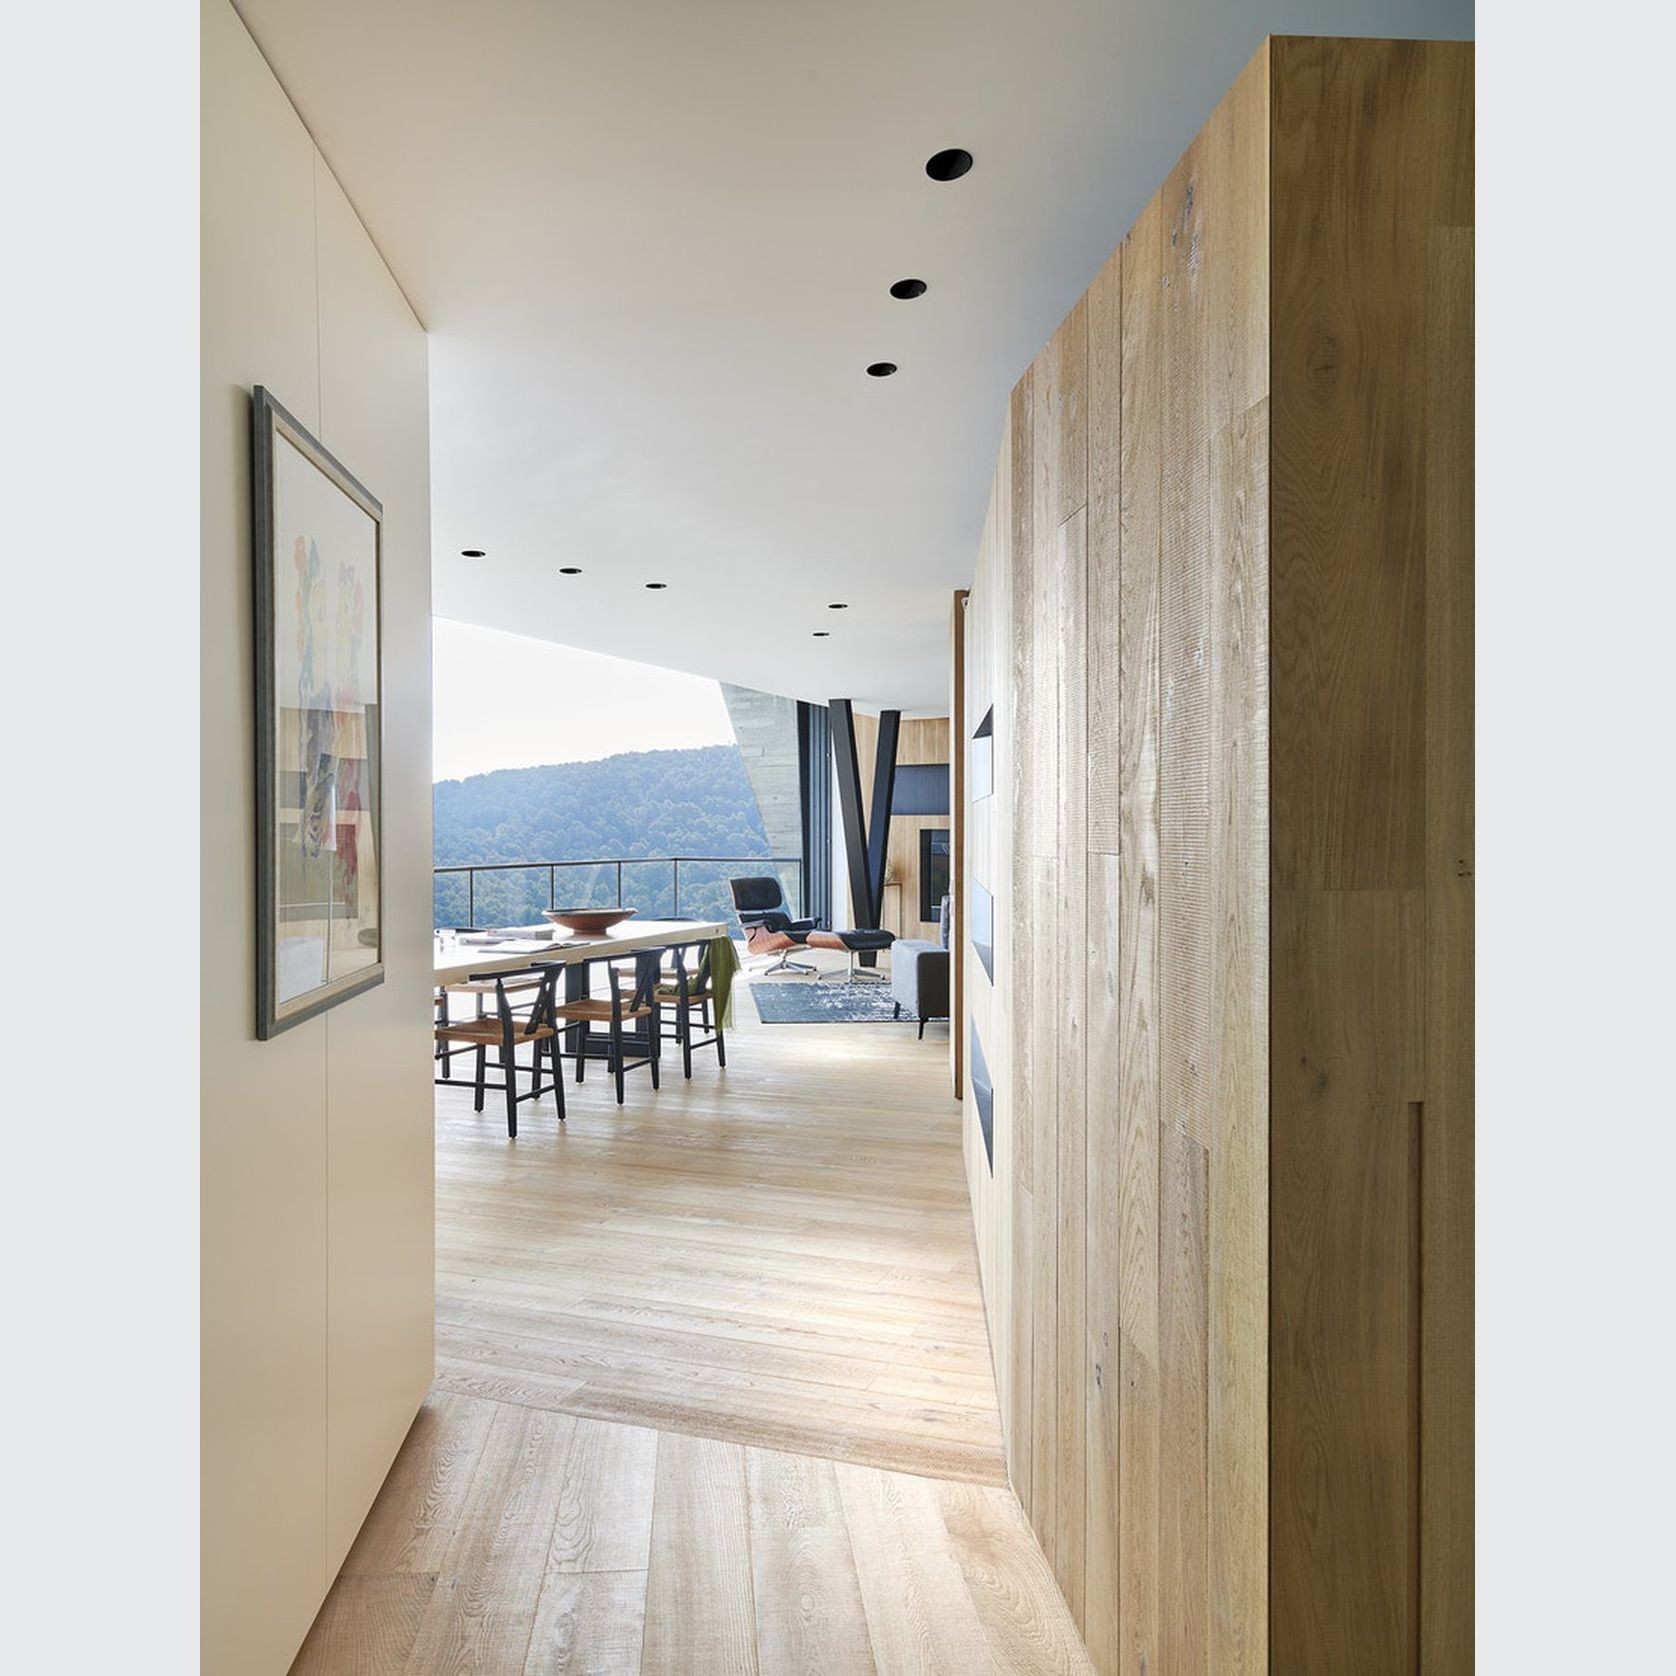 Light Shadow Pro Downlight by Flos Architectural gallery detail image